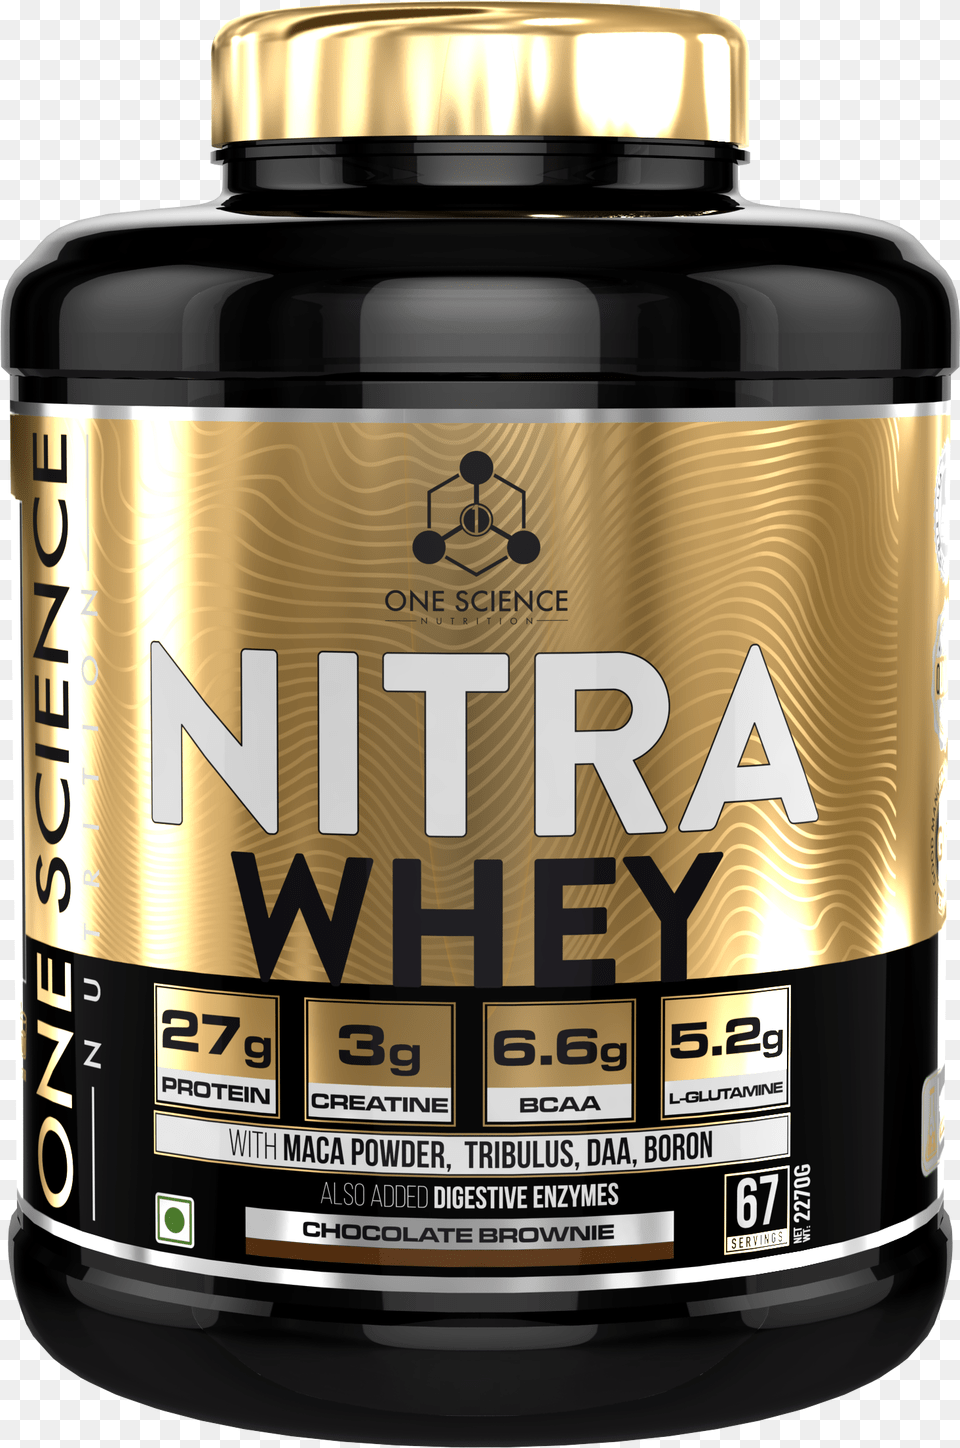 One Science Whey Protein, Bottle, Shaker Png